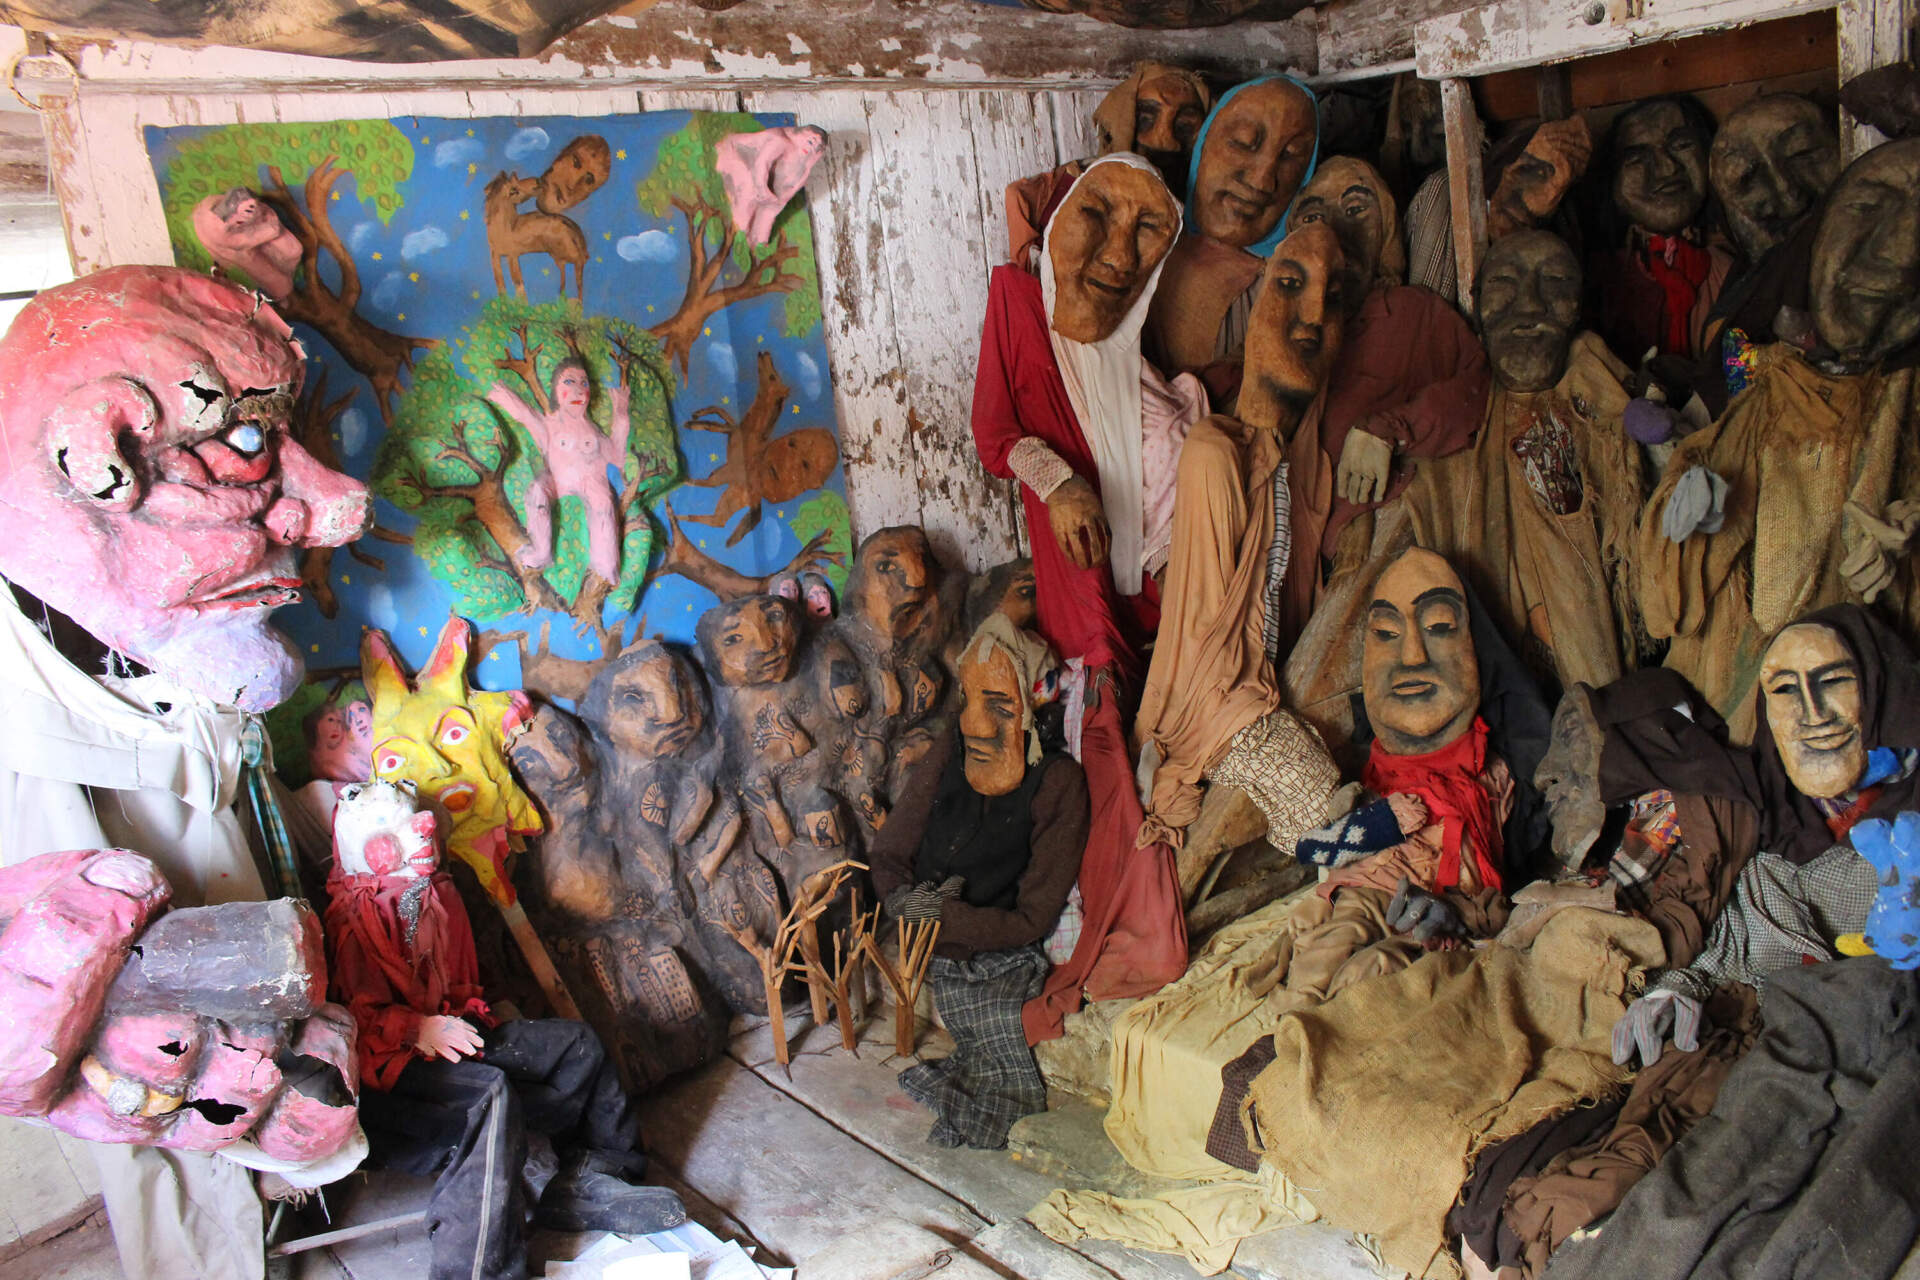 Puppets are displayed inside the Bread and Puppet Museum in Glover, Vermont, on June 12. (Zoe McDonald/Vermont Public)